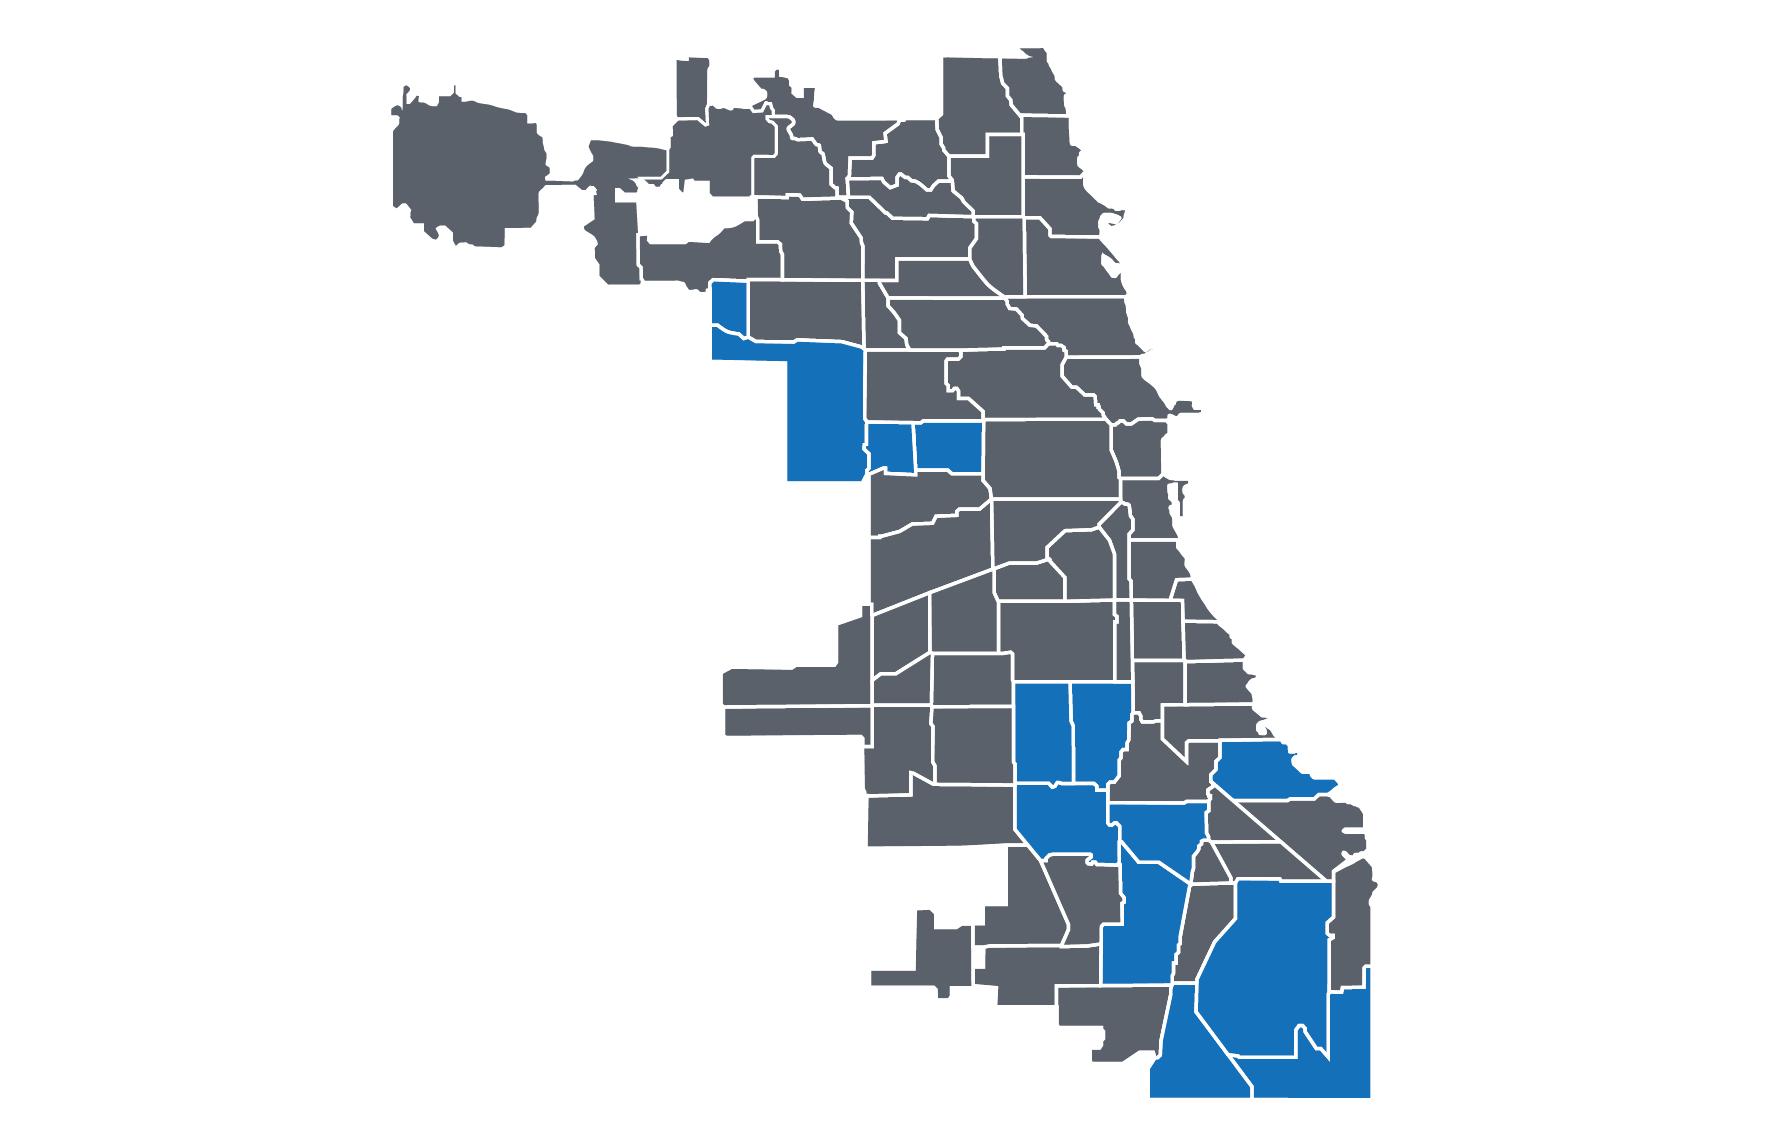 The first 13 communities to be targeted for block-by-block canvassing are: Auburn Gresham, Austin, Chatham, East Garfield Park, Englewood, Hegewisch, Montclare, Riverdale, Roseland, South Deering, South Shore, West Englewood, and West Garfield Park.